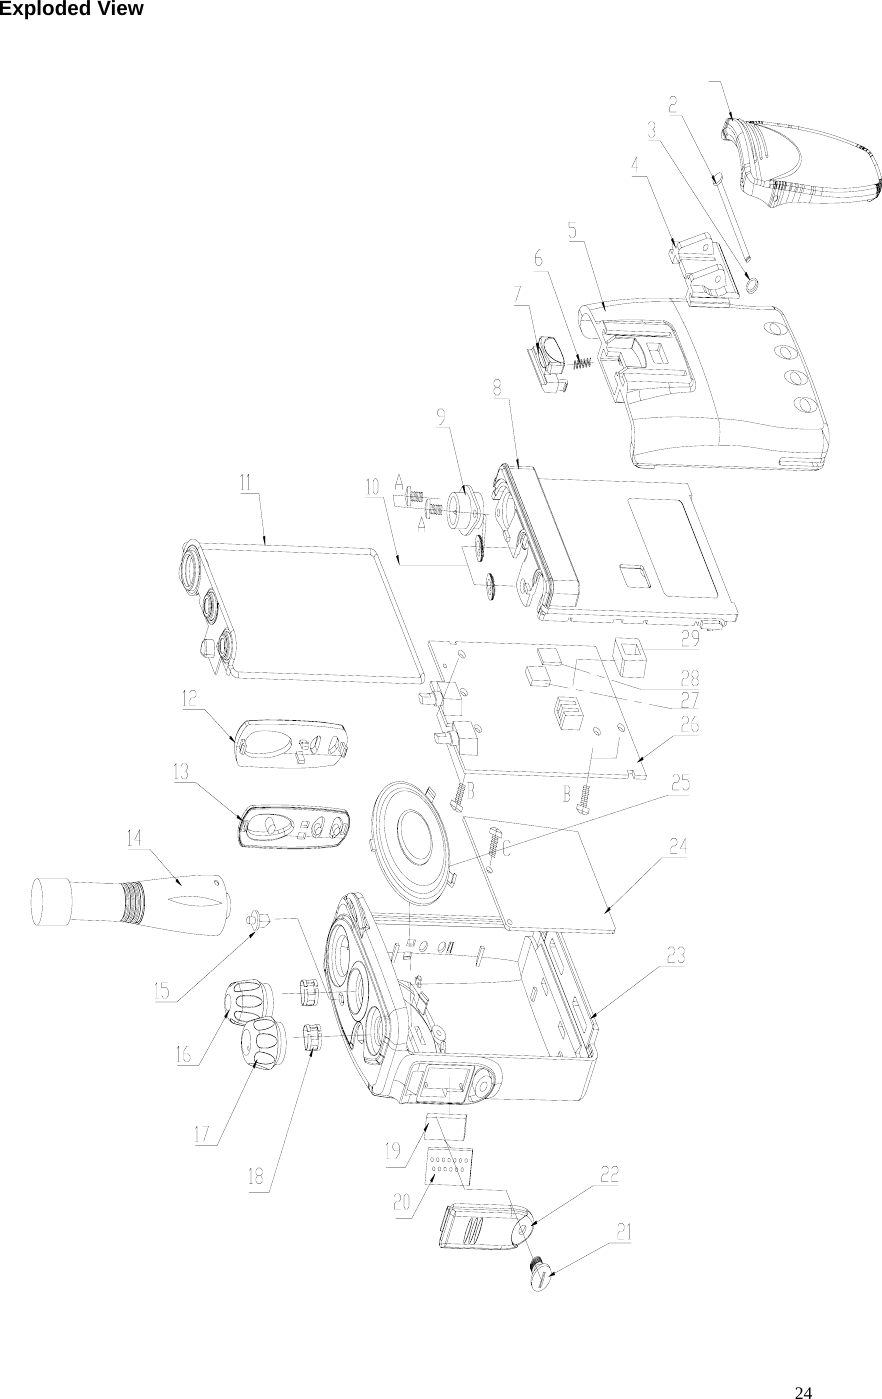  24Exploded View 